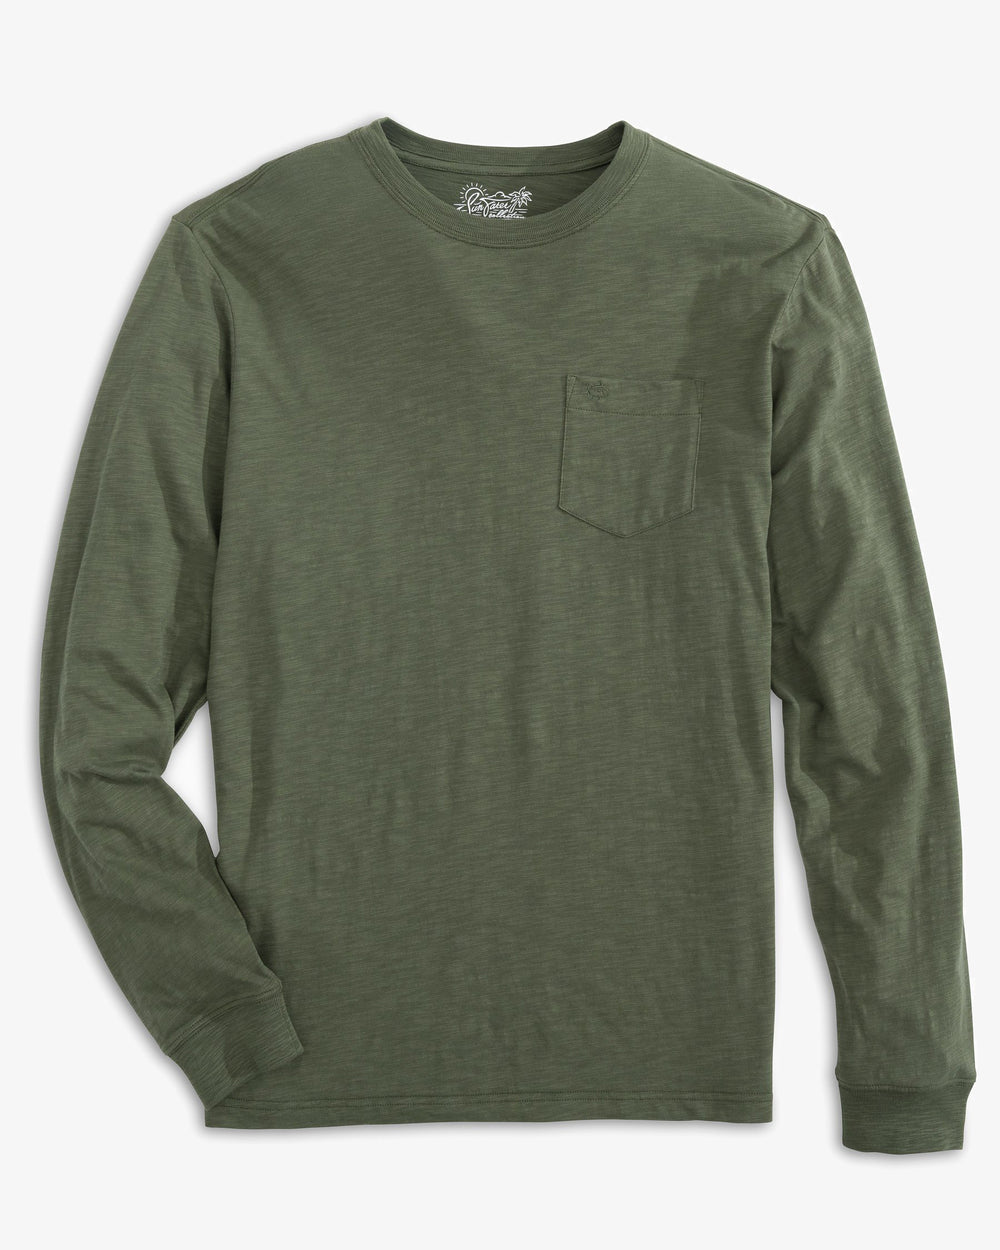 The front of the Men's Sun Farer Long Sleeve T-Shirt by Southern Tide - Forest Night